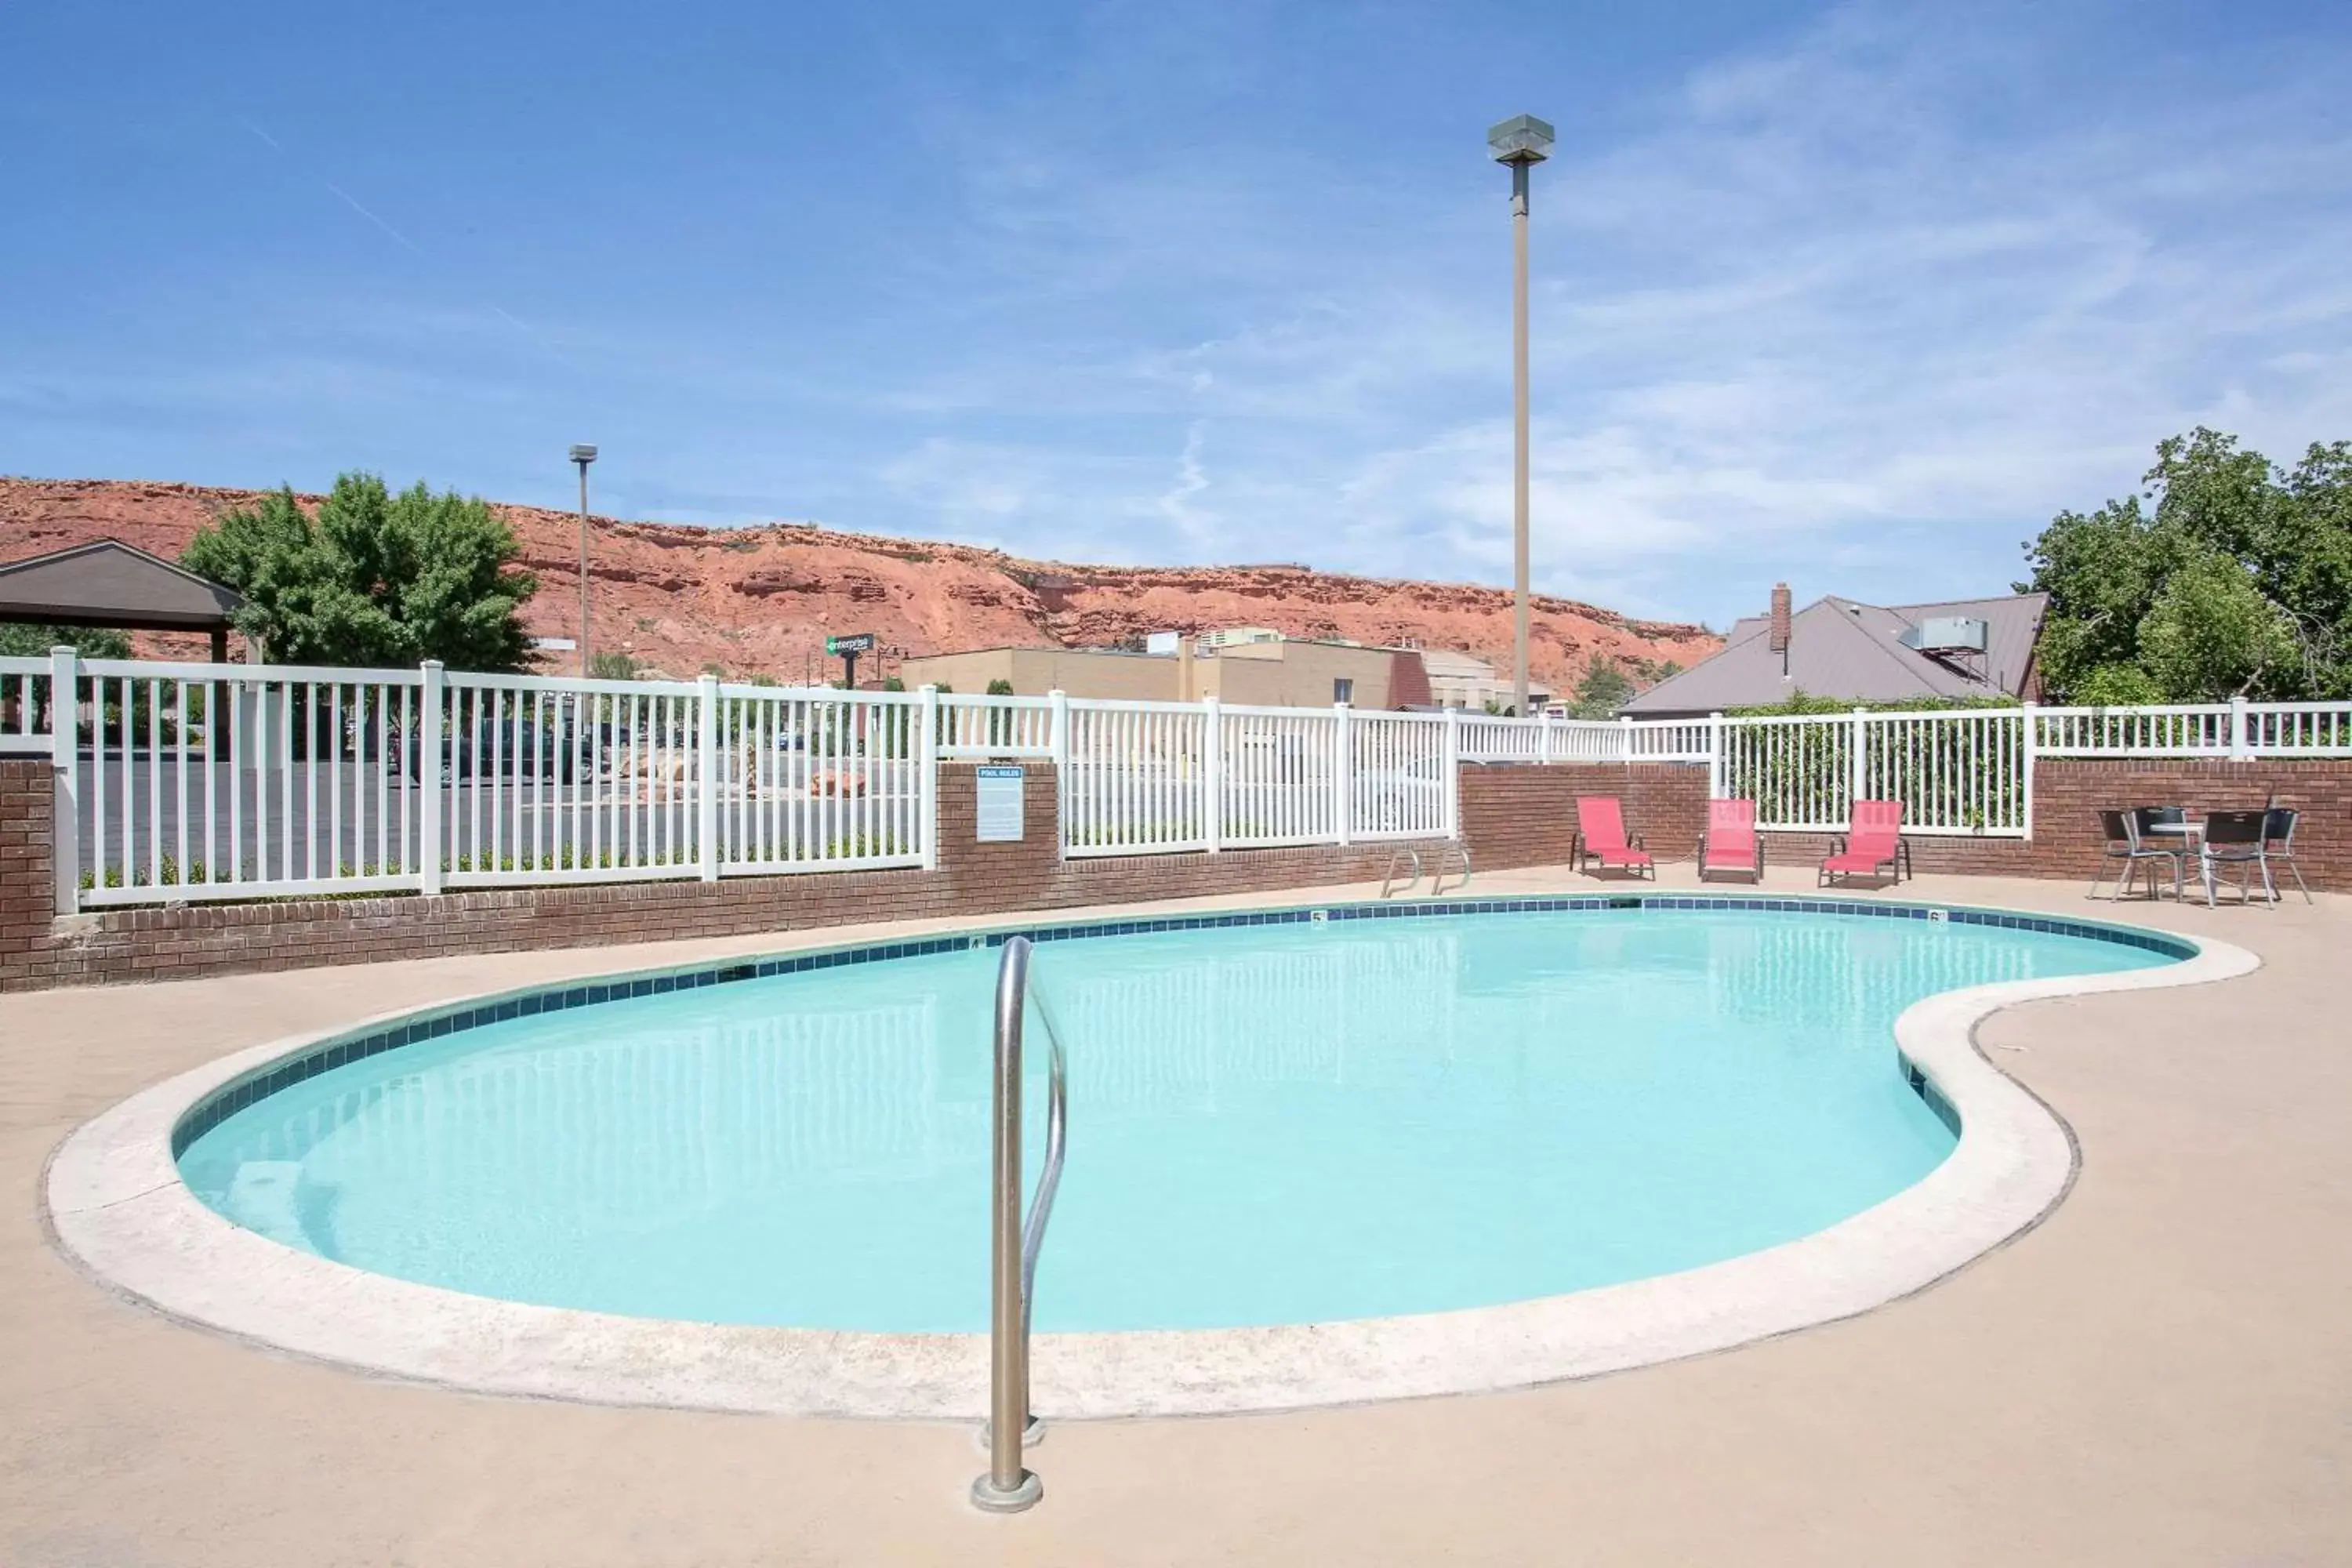 On site, Swimming Pool in Super 8 by Wyndham St. George UT